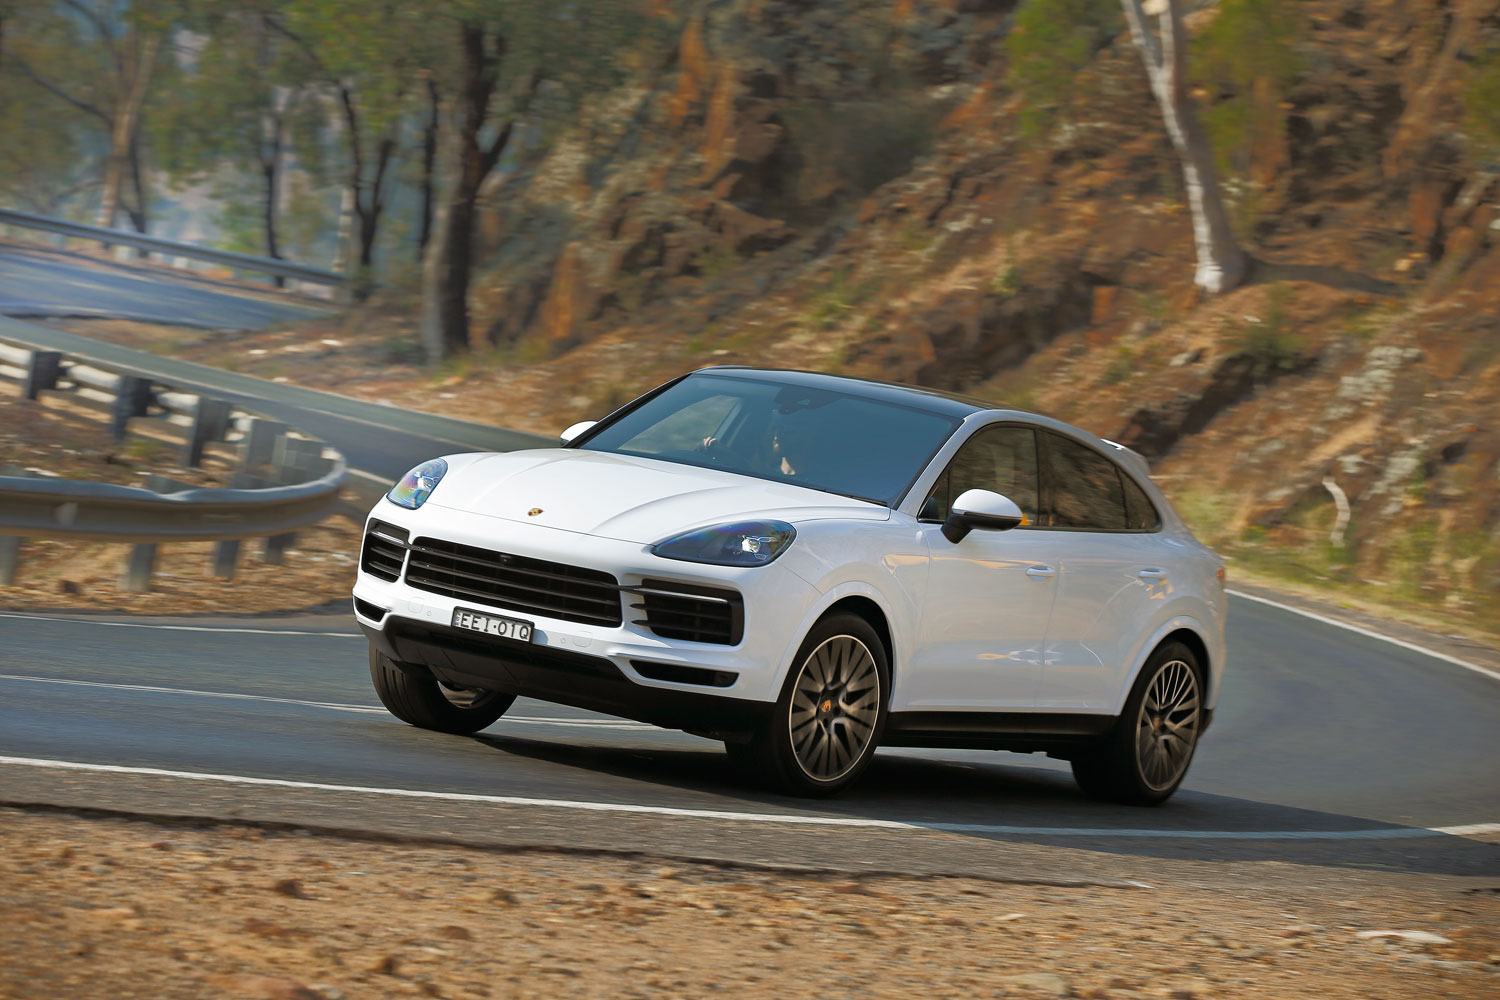 2020 Porsche Cayenne Coupe Driven: The Hulked-Up Hot Hatchback